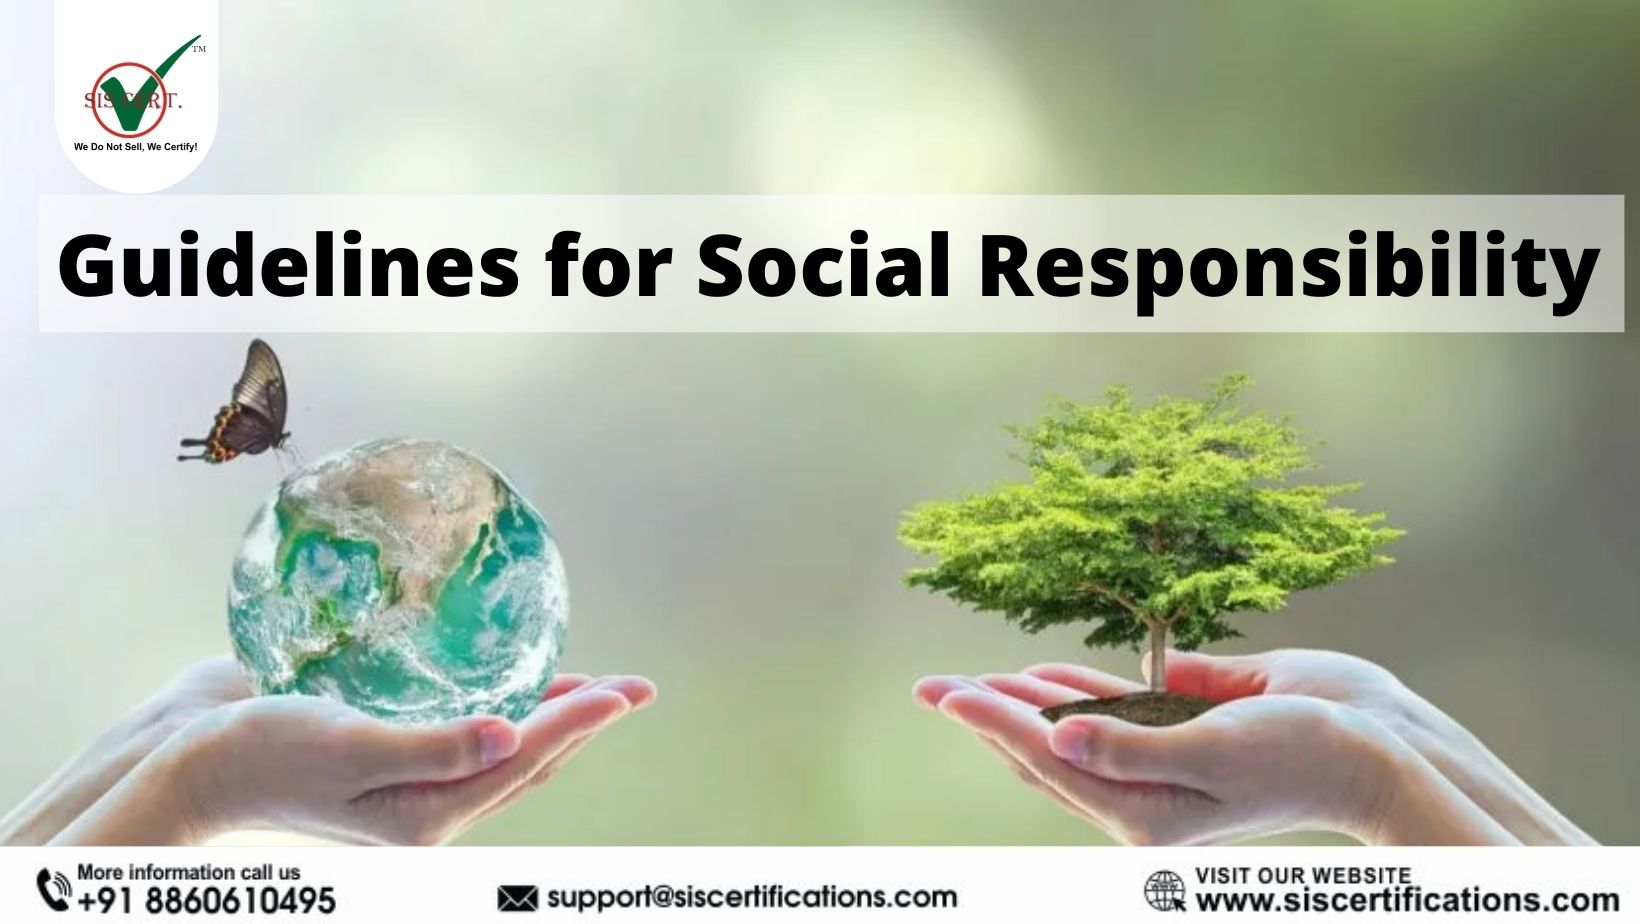 ISO 26000 Guidelines for Social Responsibility